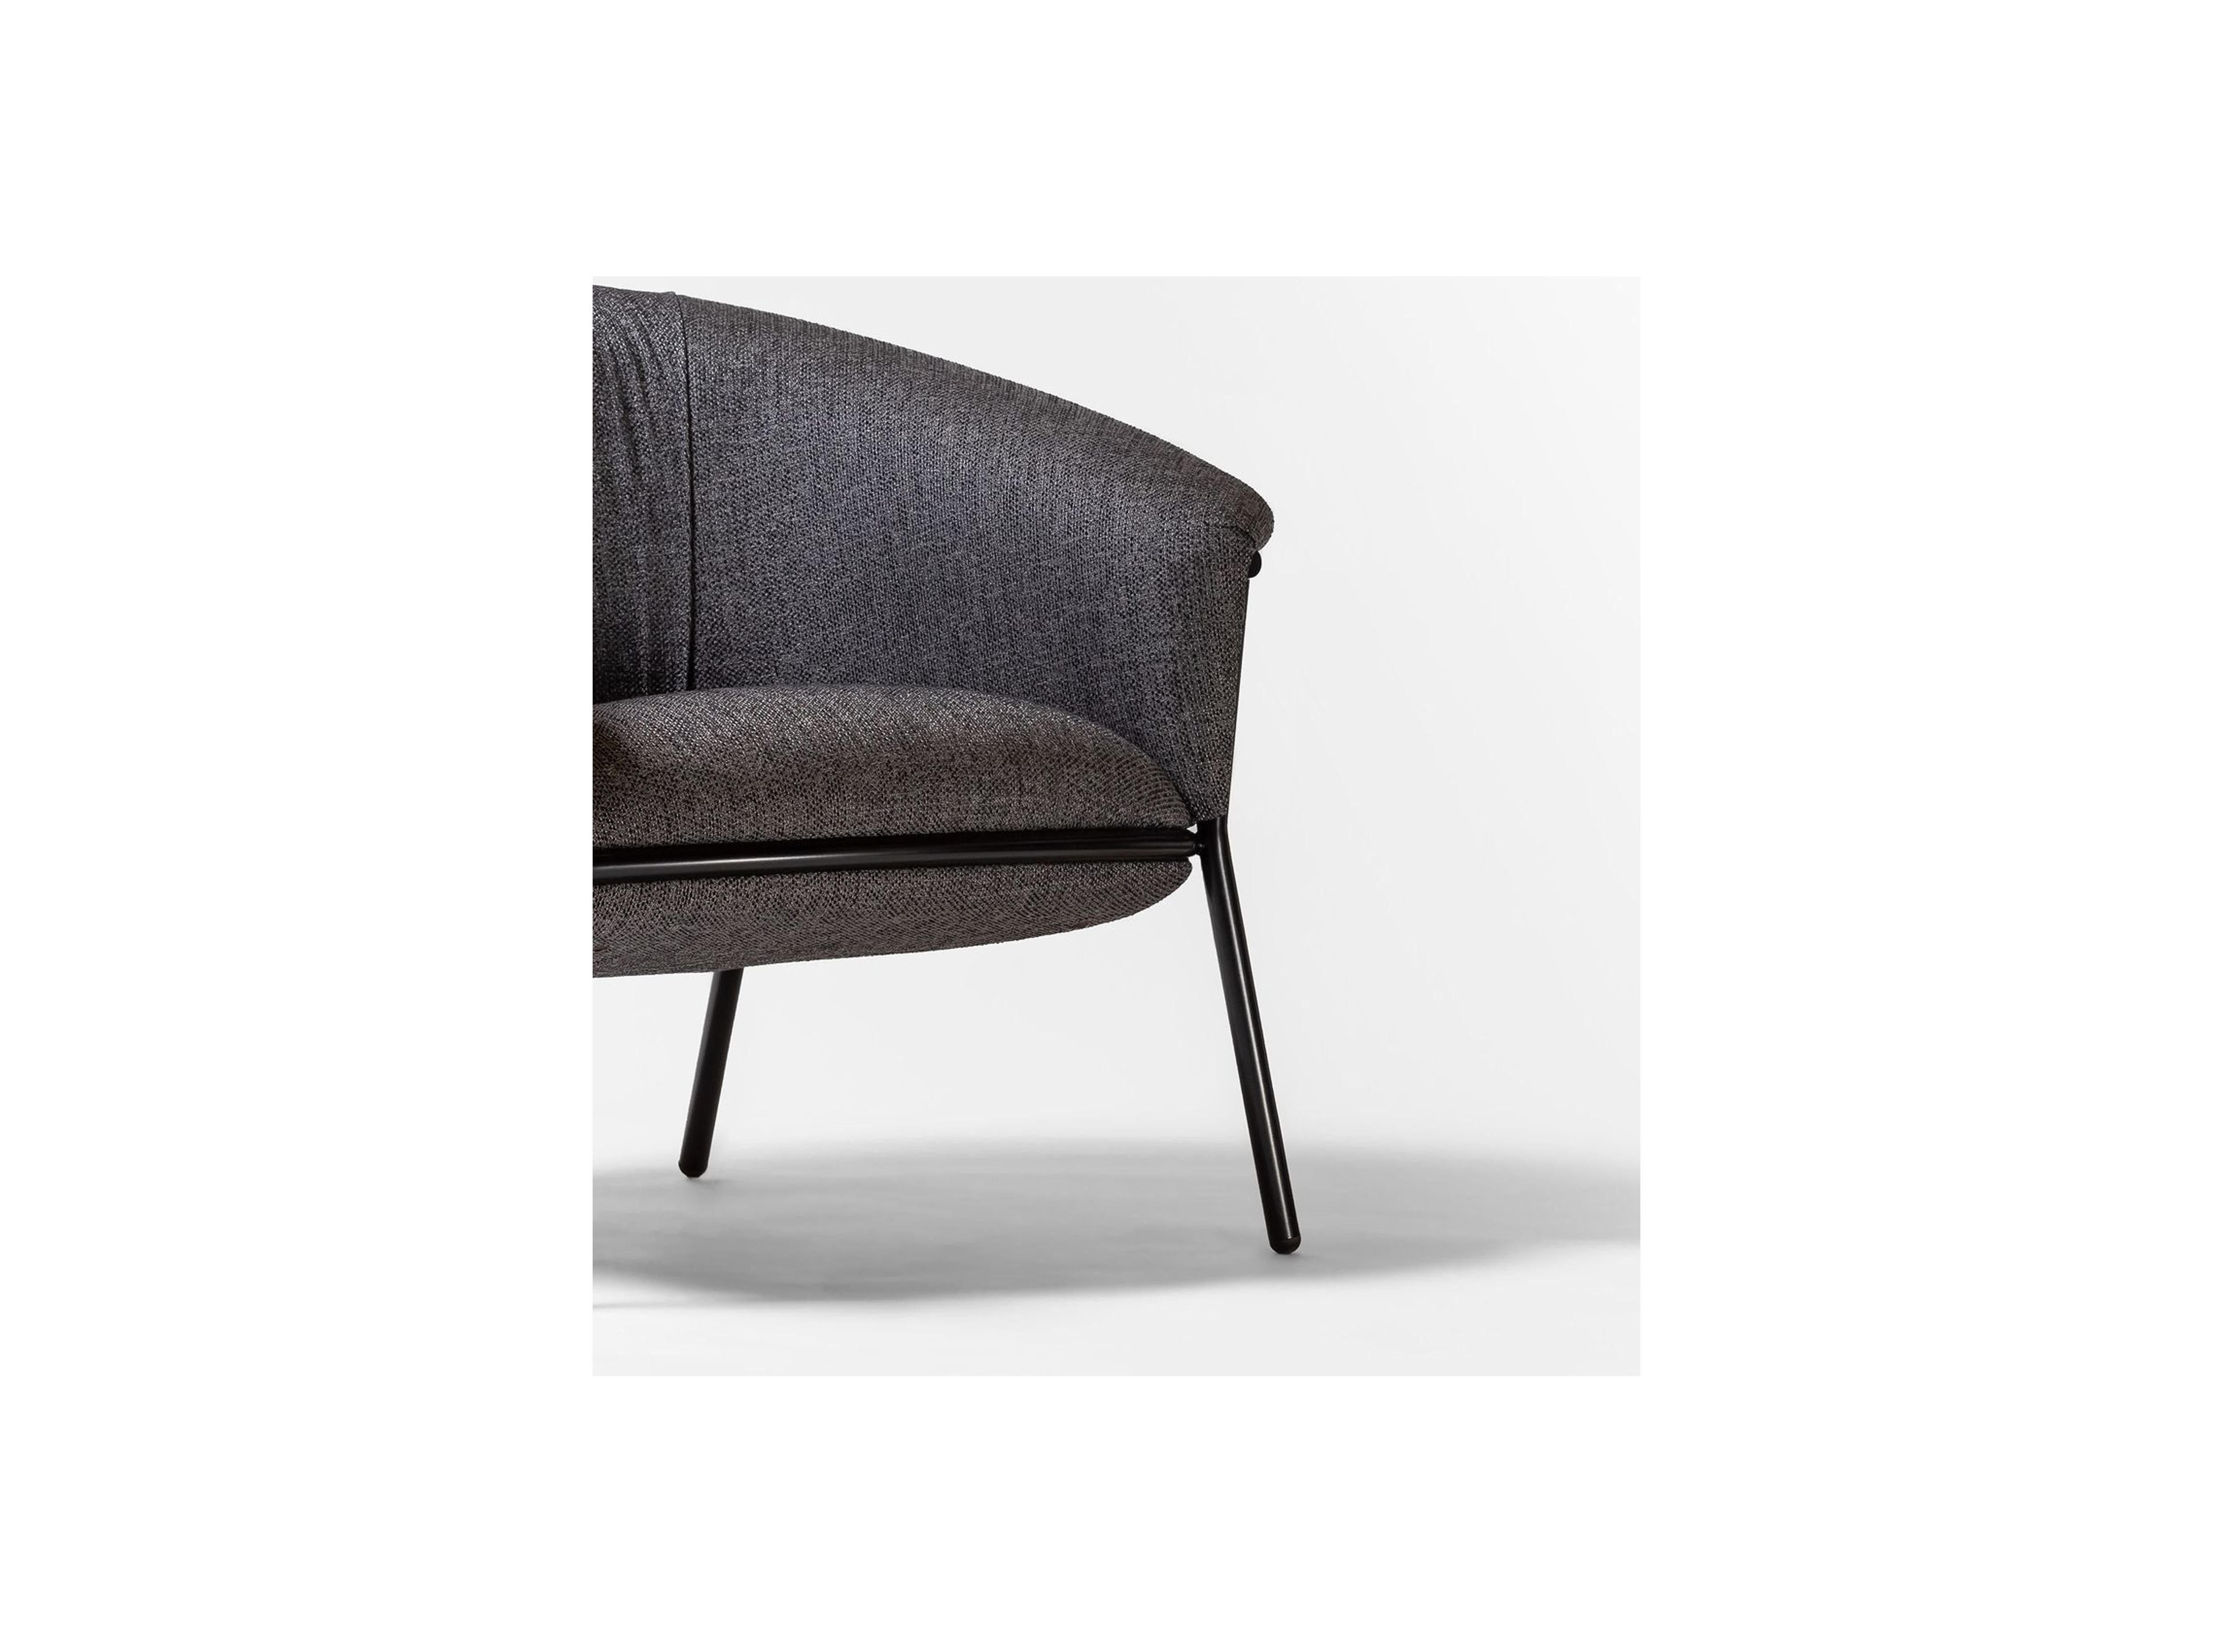 Lacquered Stephen Burks, Contemporary, Black Fabric Upholester Grasso Armchair For Sale